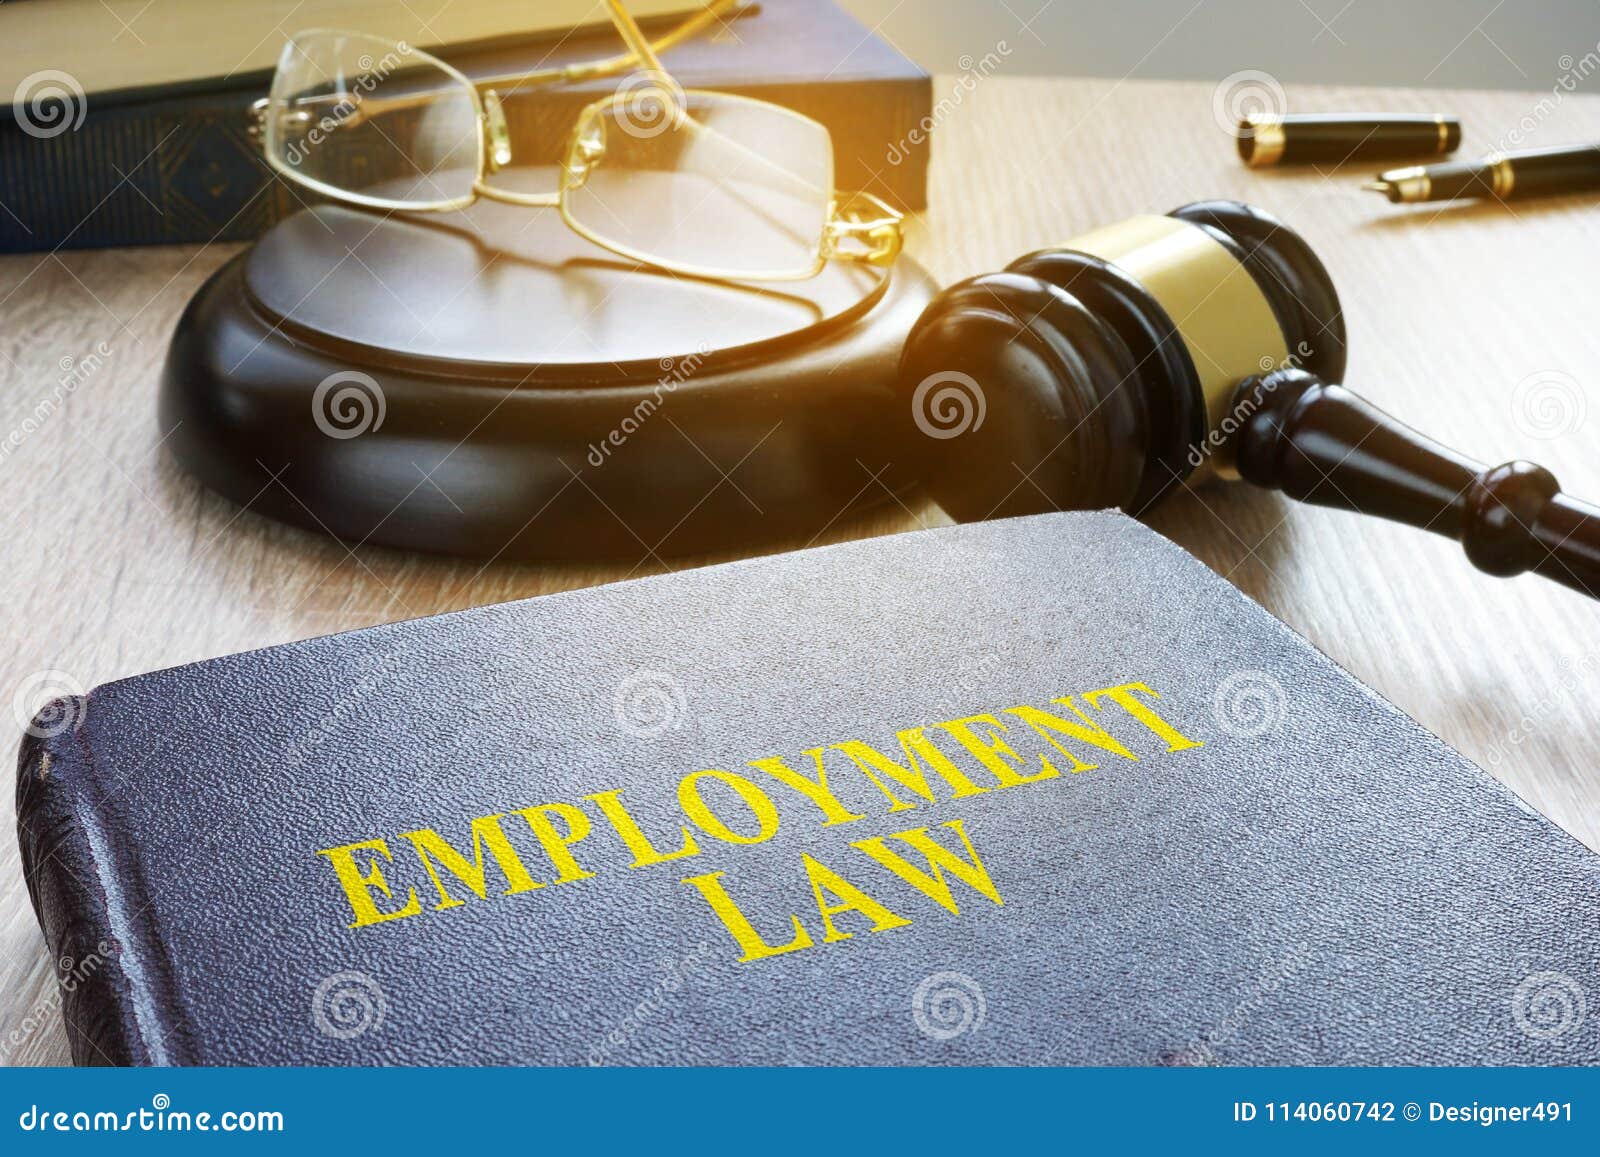 employment law in a court. labor code.